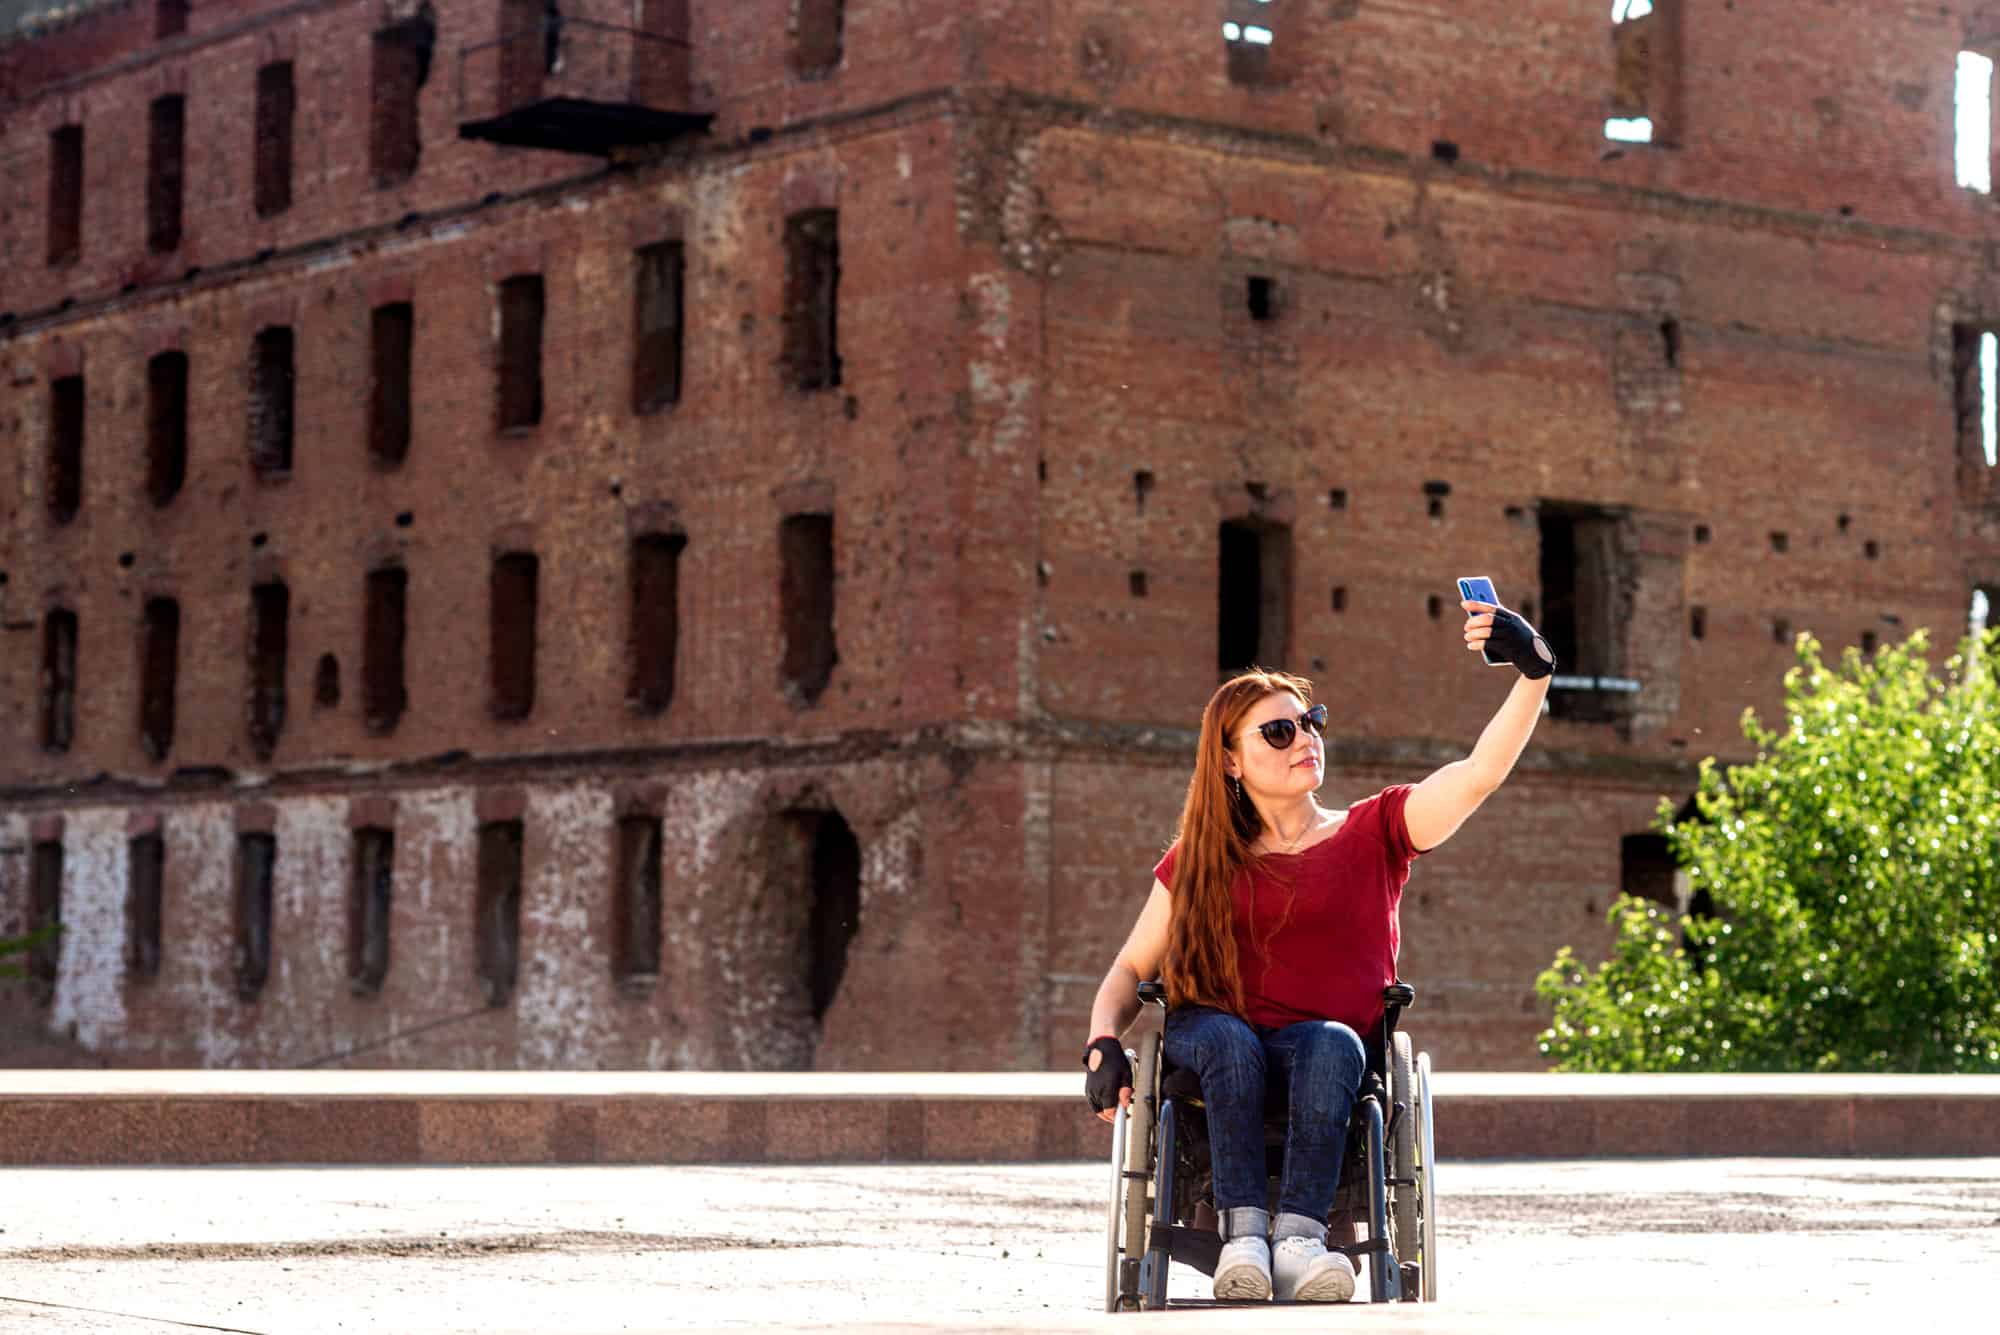 A young person seated in a wheelchair takes a picture of themself in front of a historical monument.